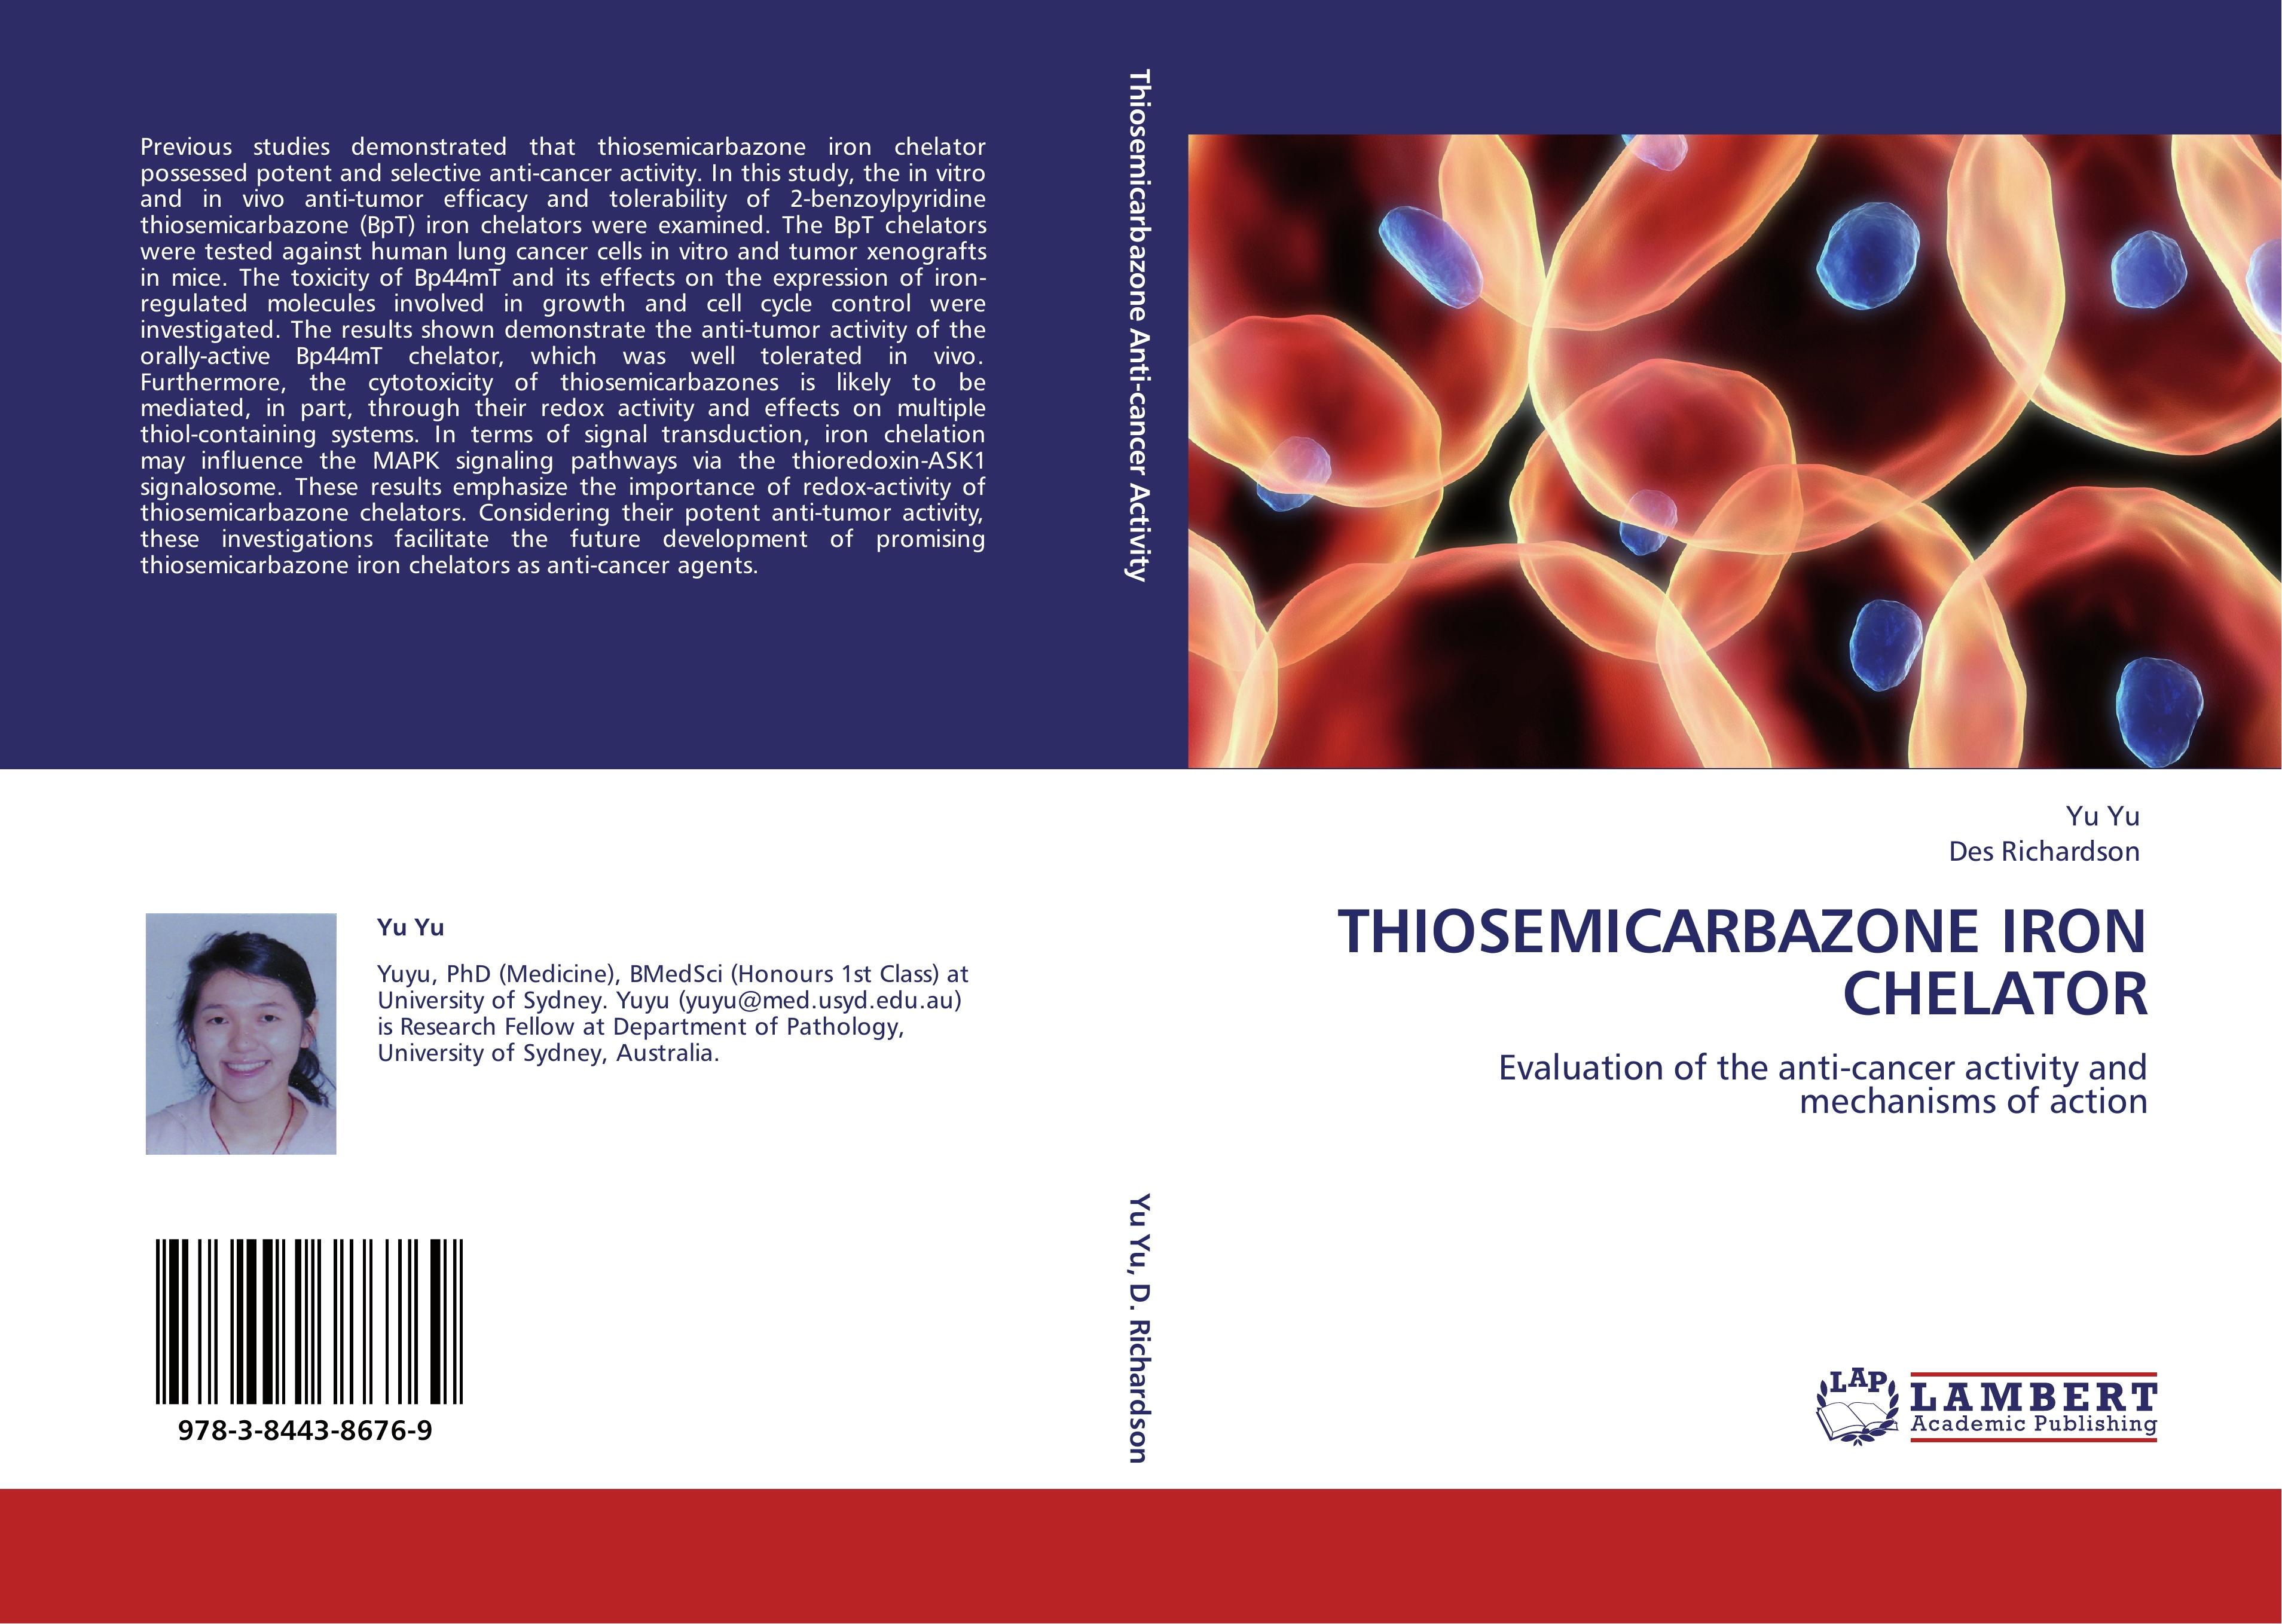 THIOSEMICARBAZONE IRON CHELATOR  Evaluation of the anti-cancer activity and mechanisms of action  Yu Yu  Taschenbuch  Paperback  Englisch  2011 - Yu, Yu